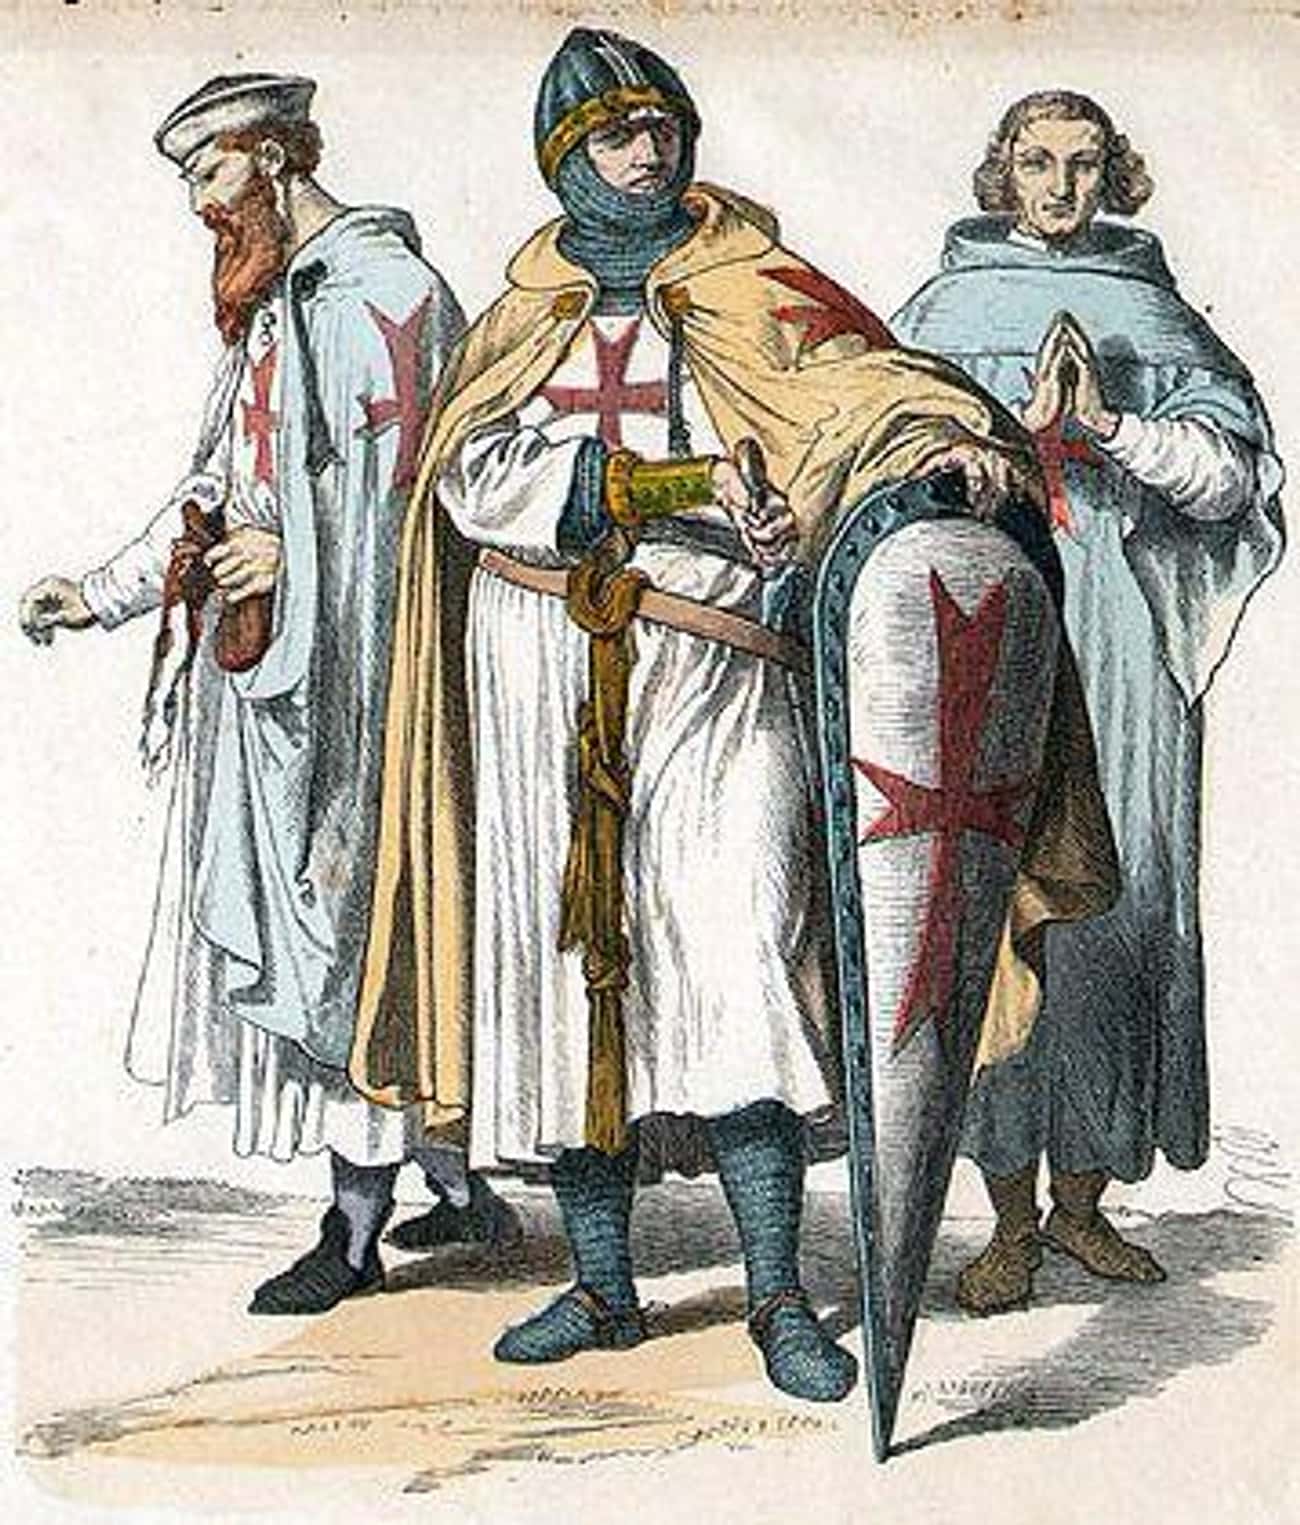 Orchestrating The Fall Of The Knights Templar To Appease A Broke King